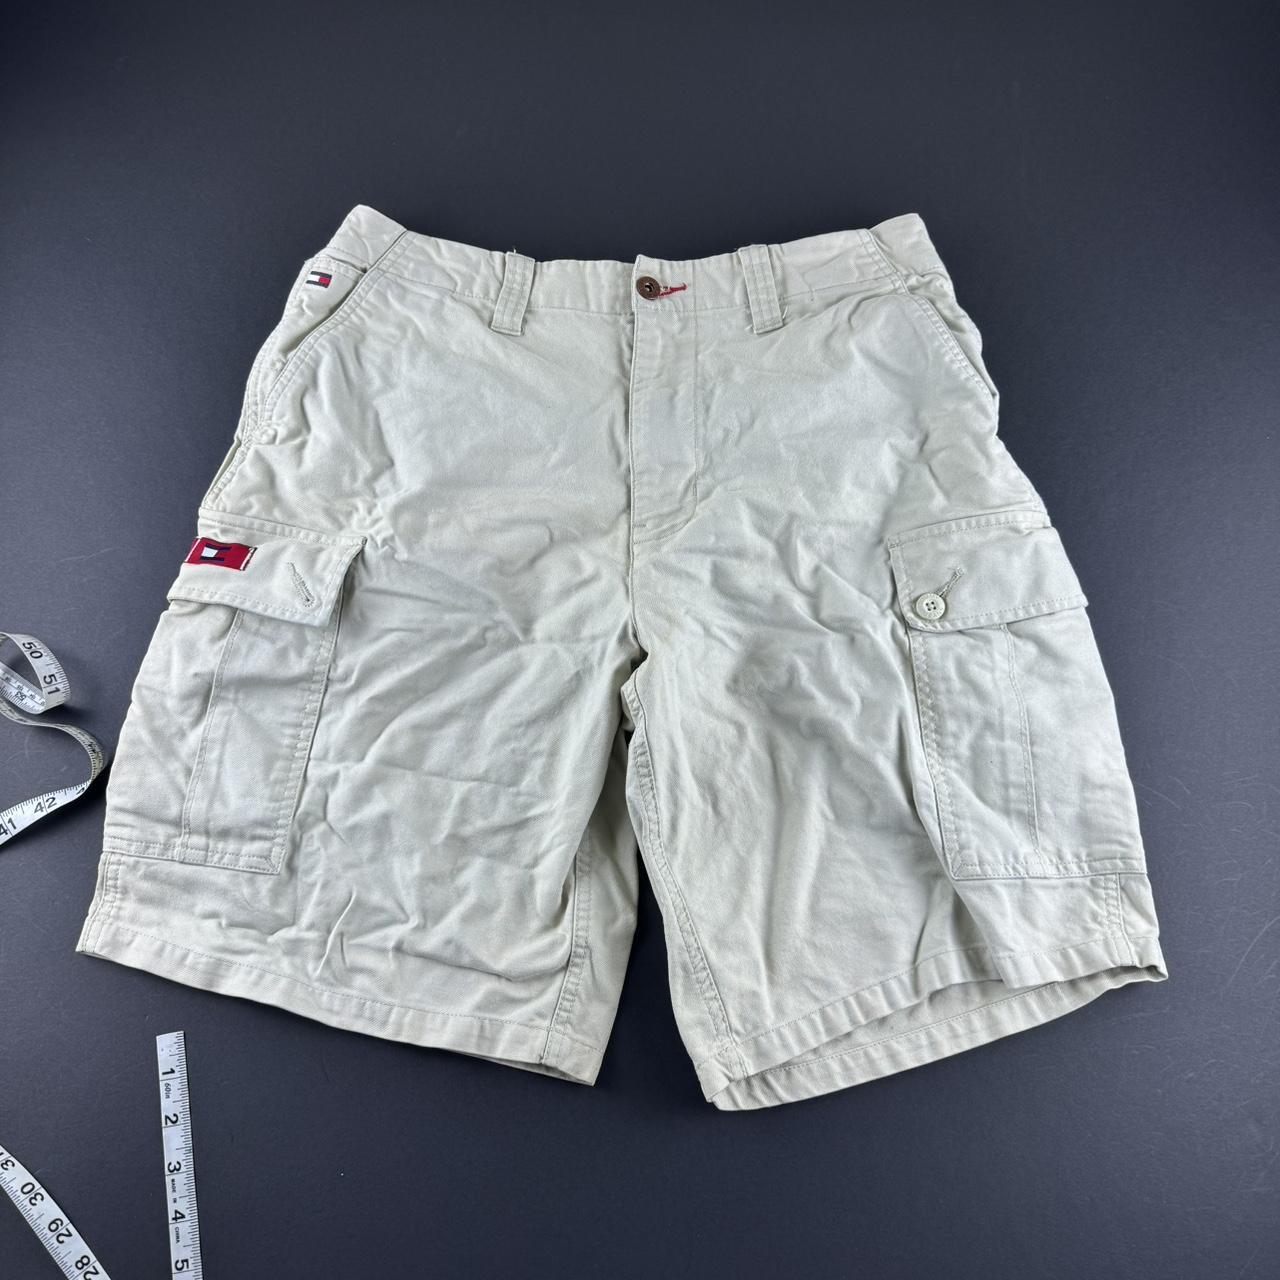 Tommy Hilfiger Men's Cream and Tan Shorts